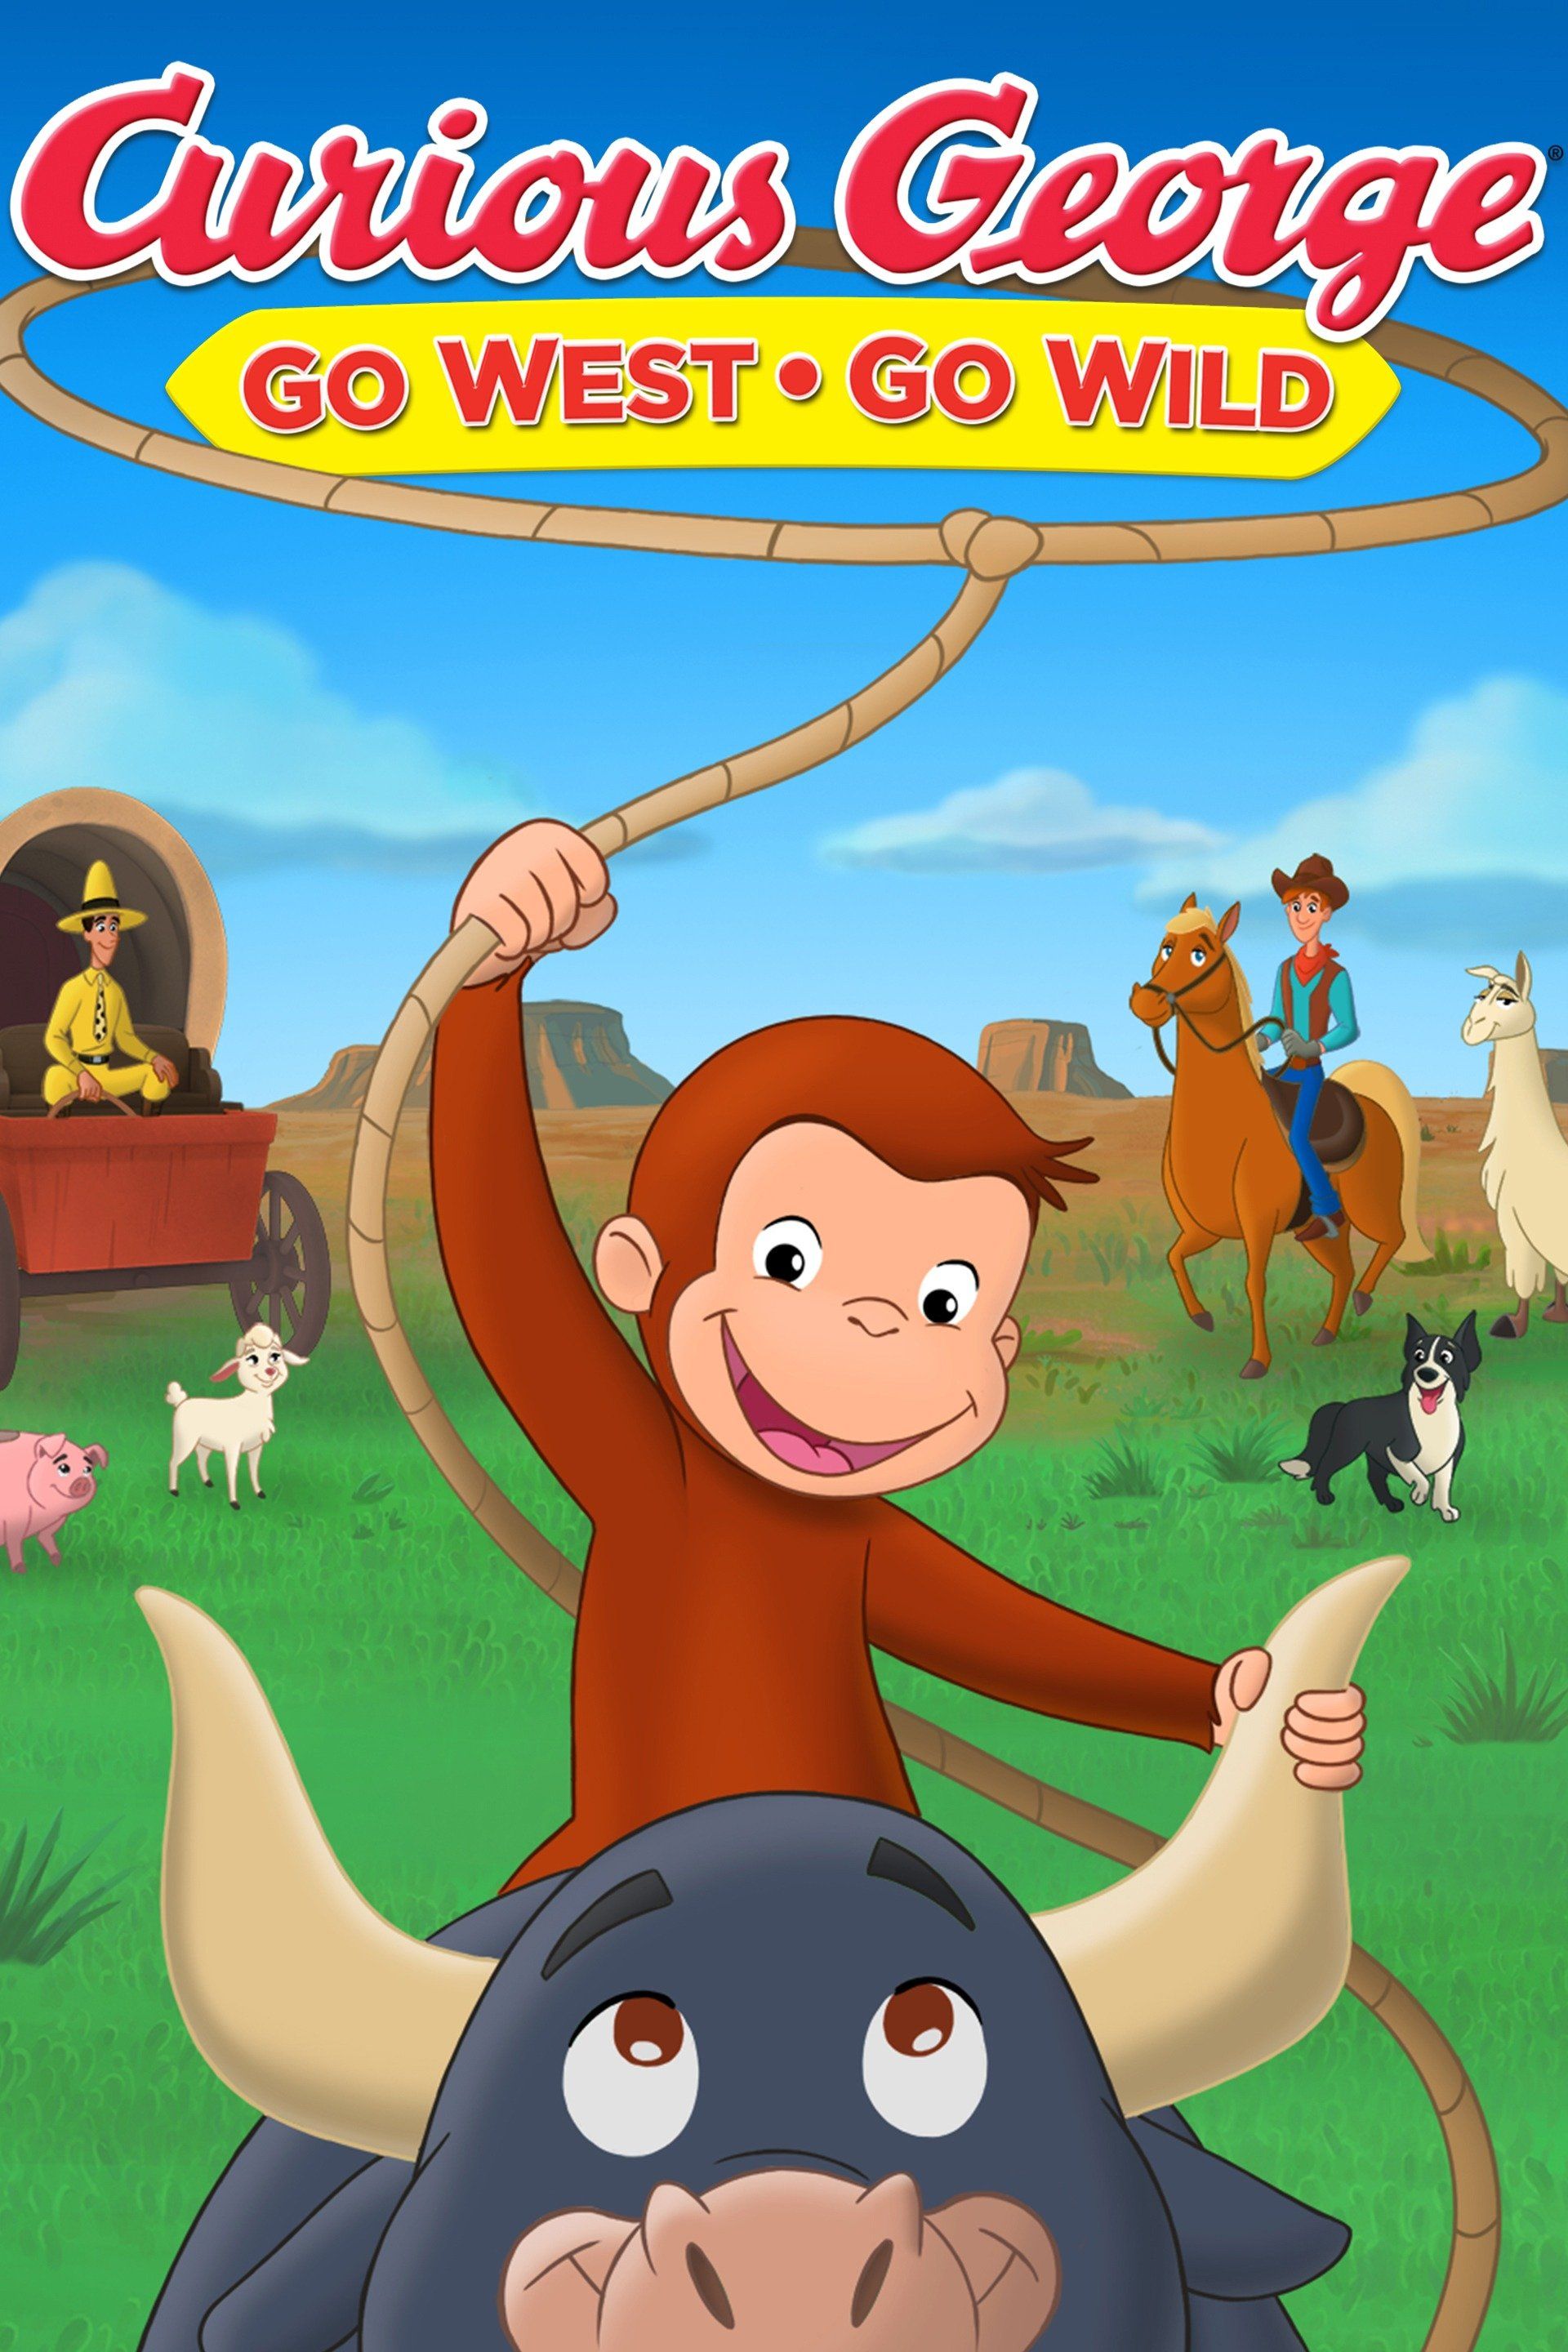 Watch Curious George 3: Back to the Jungle (2015) Full Movie Online - Plex